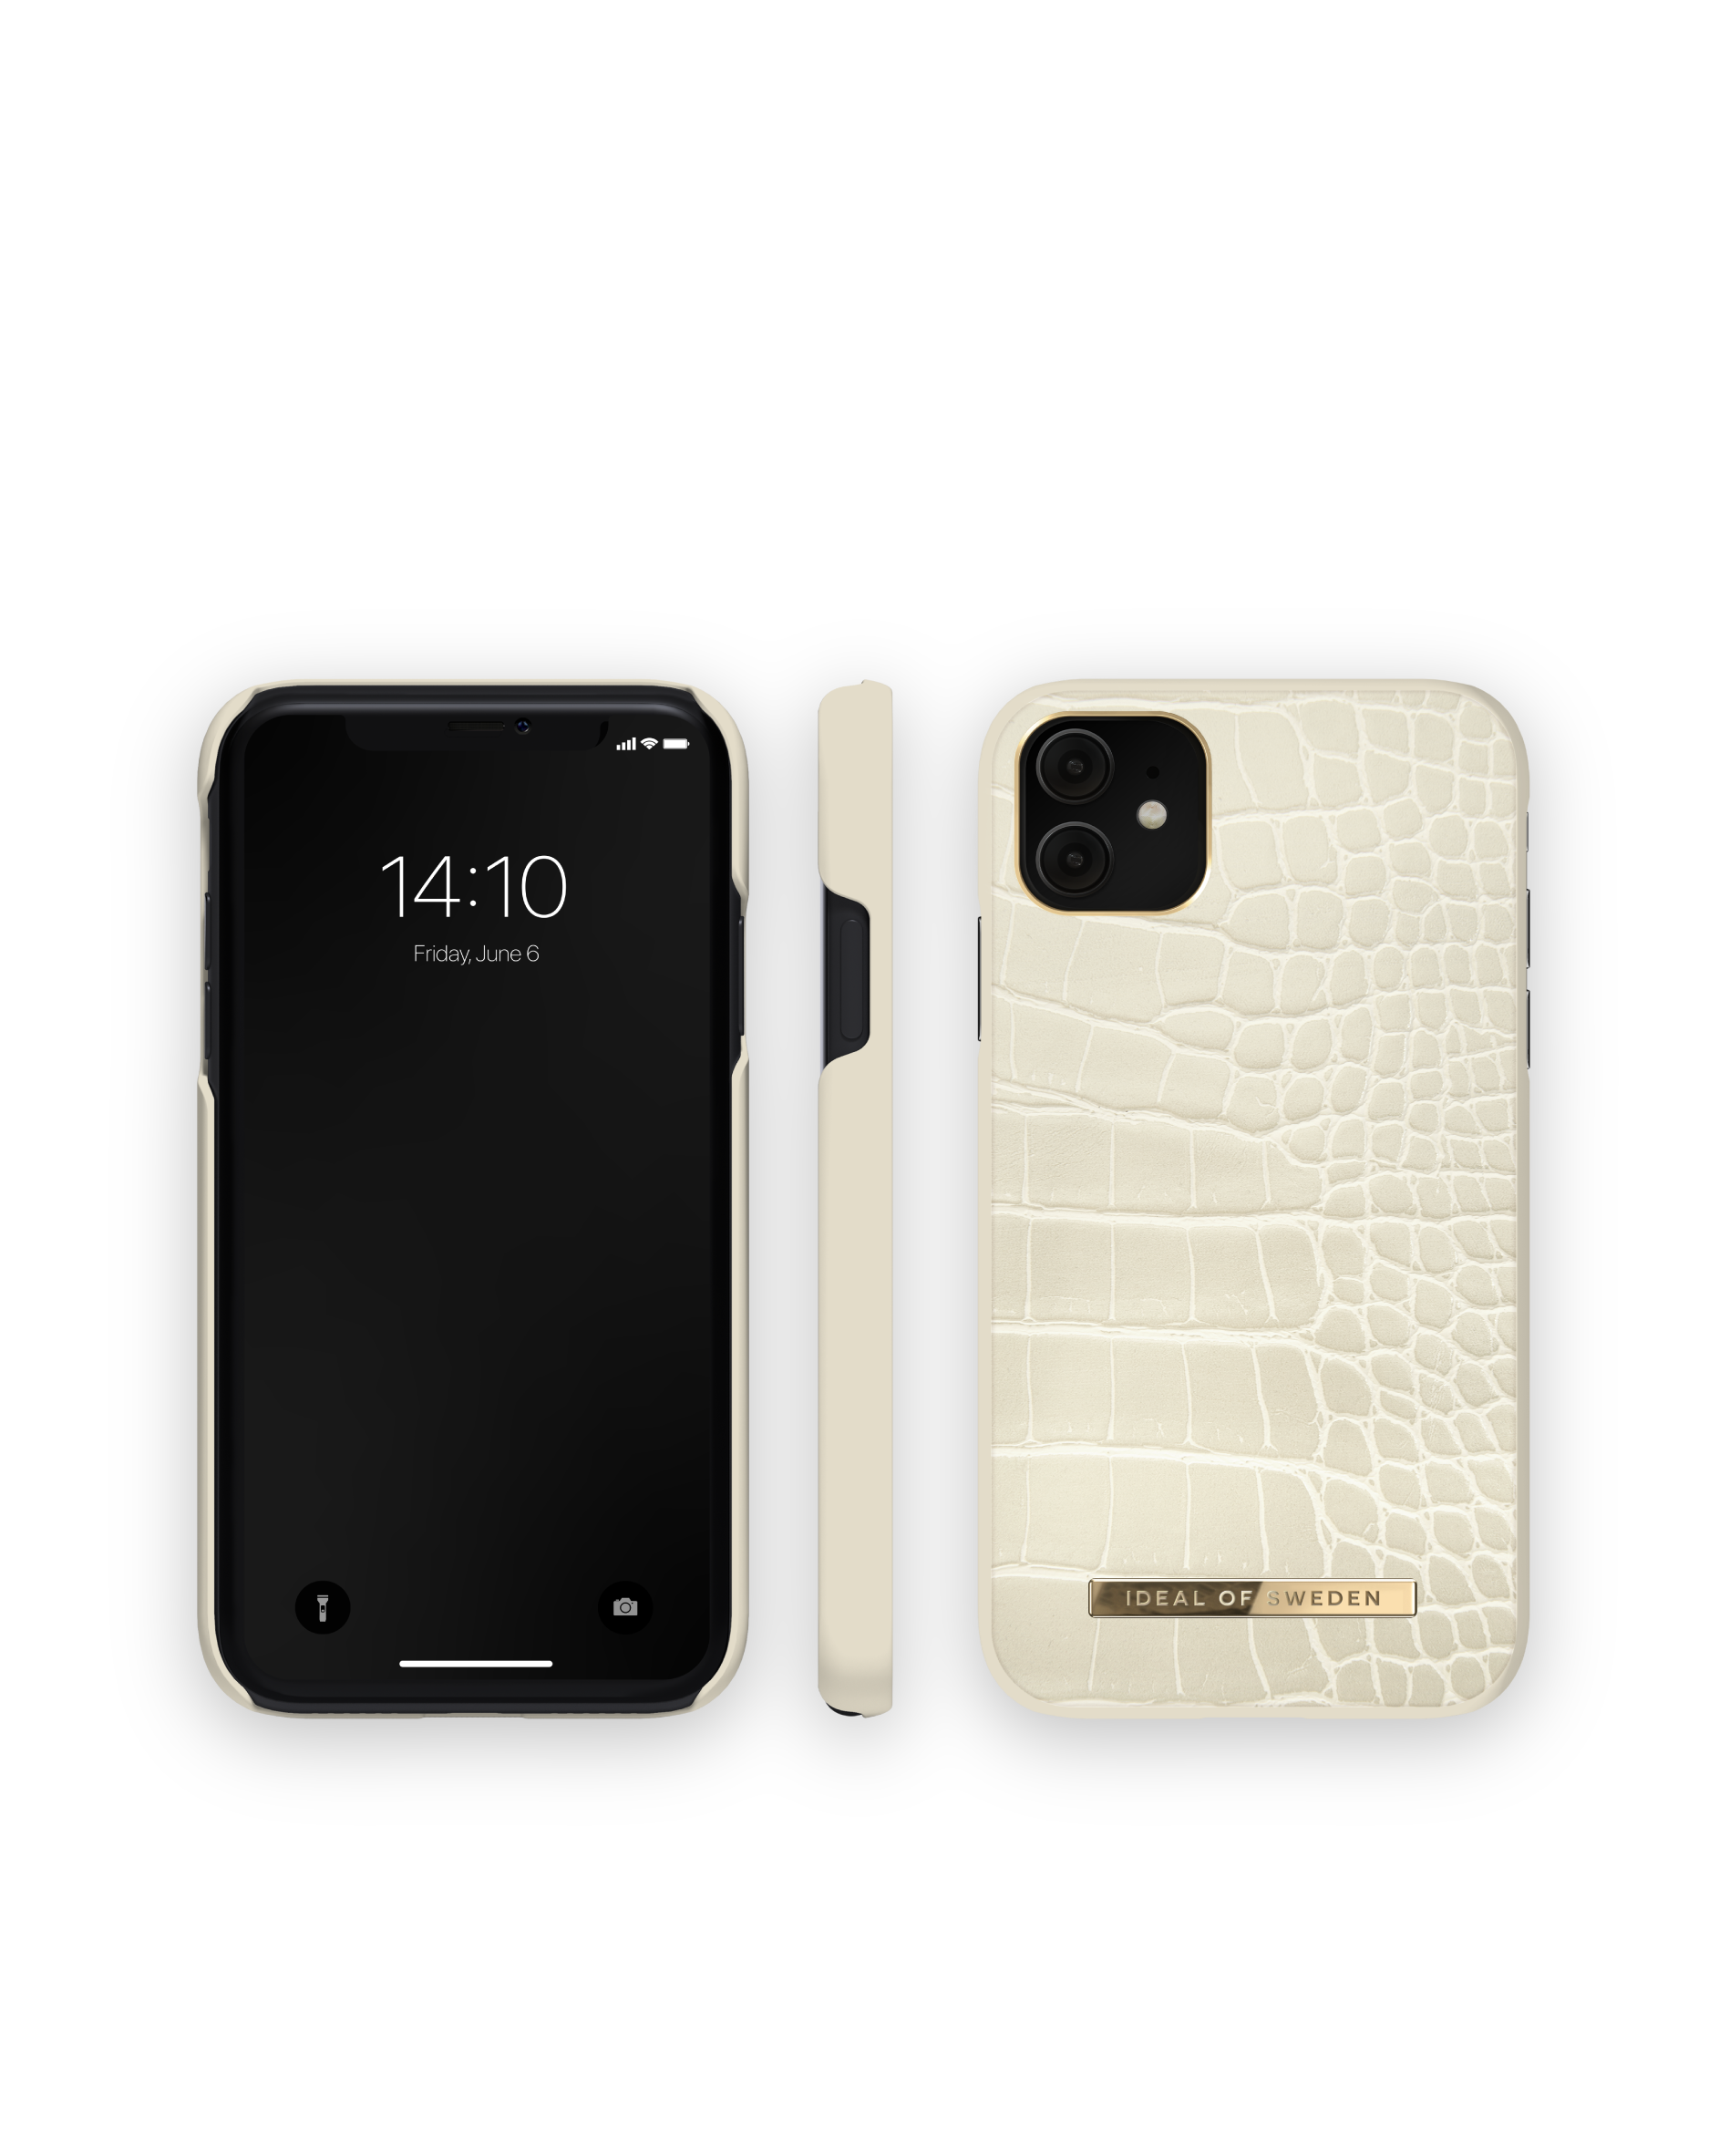 / Cream iPhone IDEAL Croco - Apple, Recycled iPhone SWEDEN IDACSS22-I1961-395, OF Beige Backcover, 11 XR,